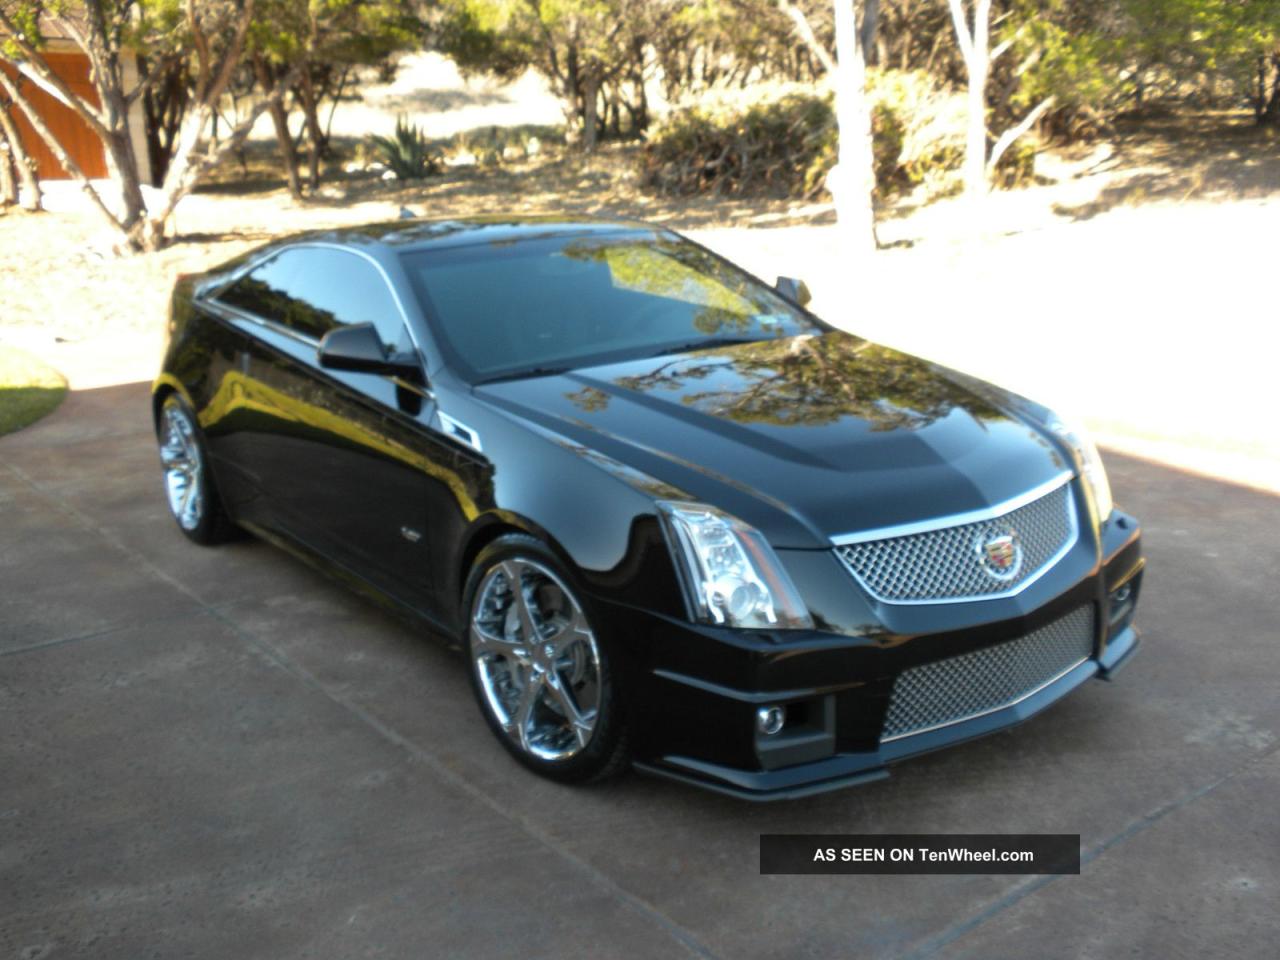 2011 Cadillac CTS V Coupe Racecar